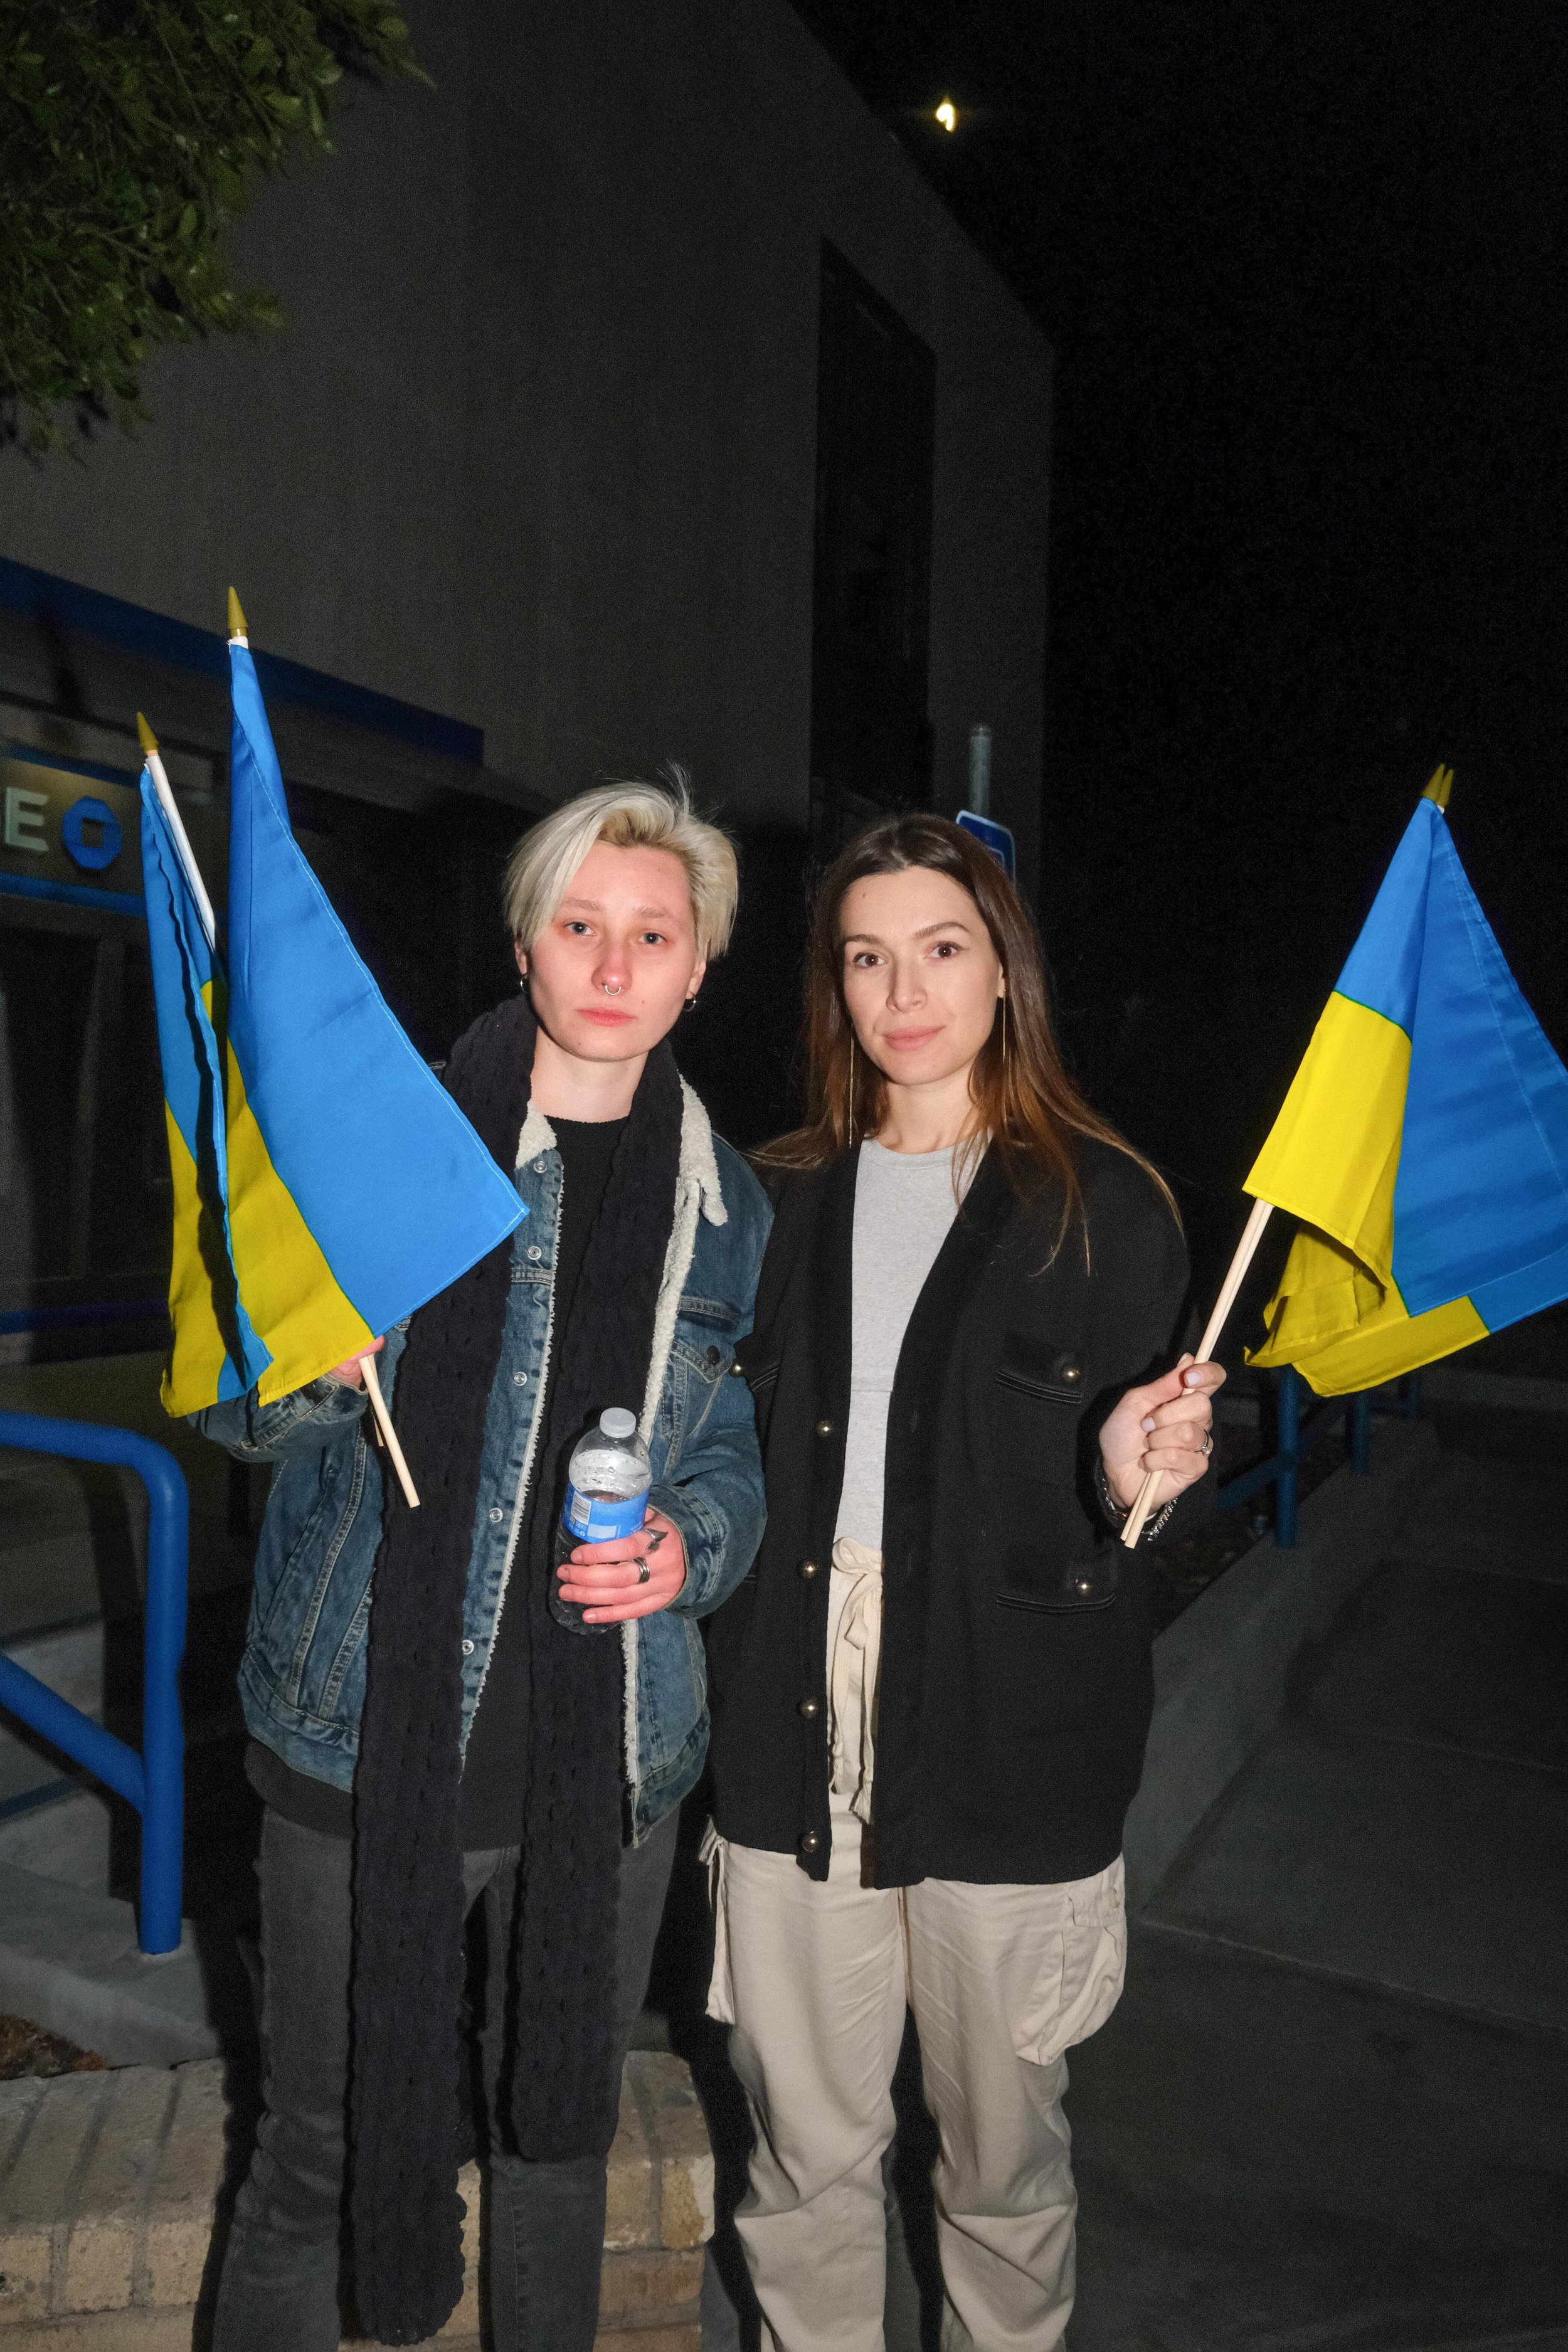  To the left, Anna Shvygar (right), has family in Ukraine that she says “are not sleeping all night. Shaking, hearing the missiles and airplanes flying over their houses, and not knowing what to say to their kids.” Liza Svietna (left) said, “I have b